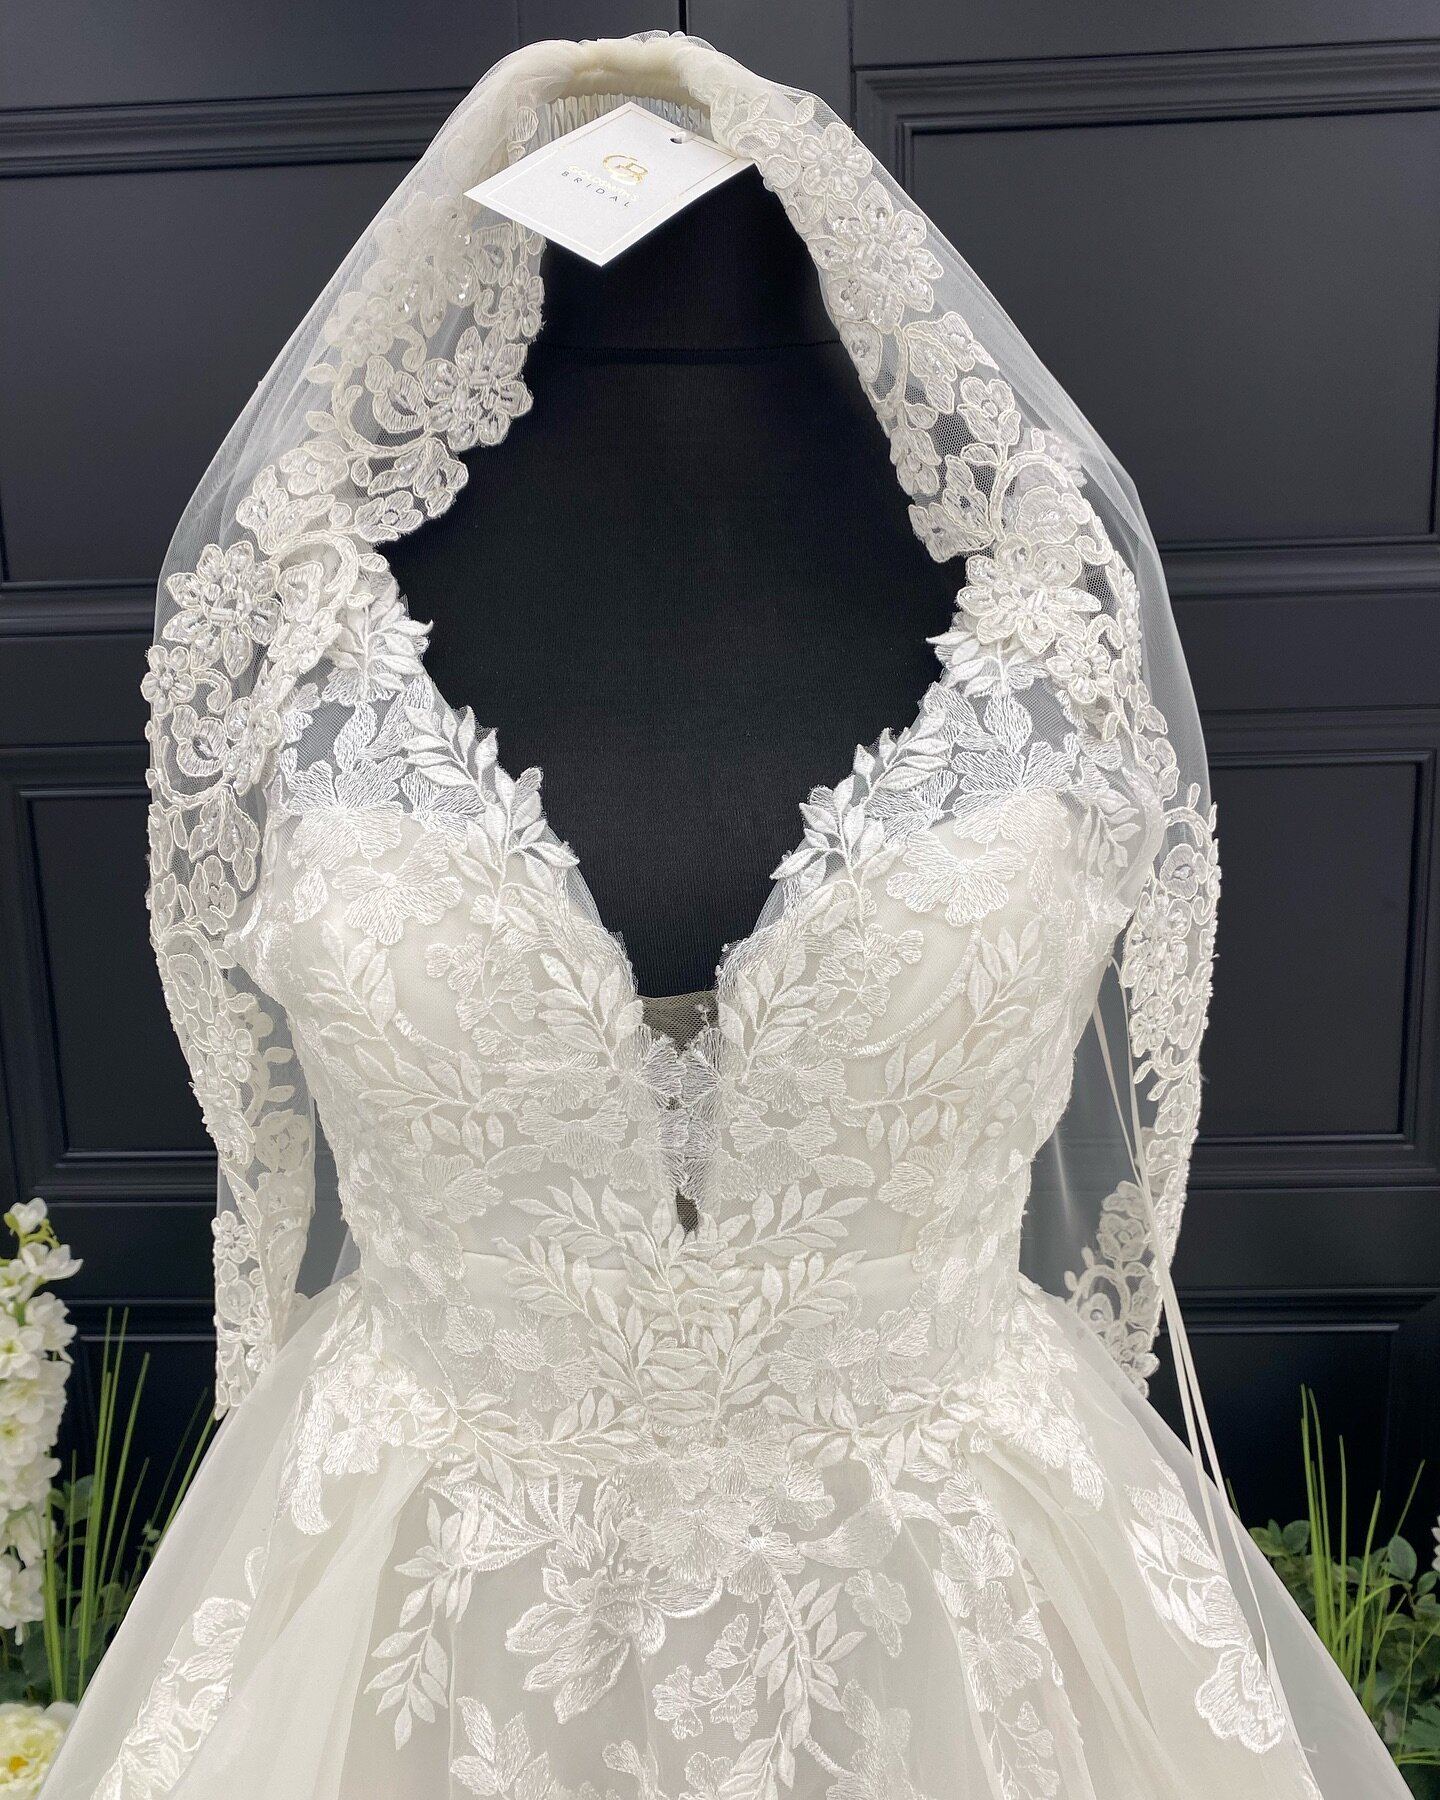 Another yes to the dress we can&rsquo;t wait to see one of our brides @waxhambarn